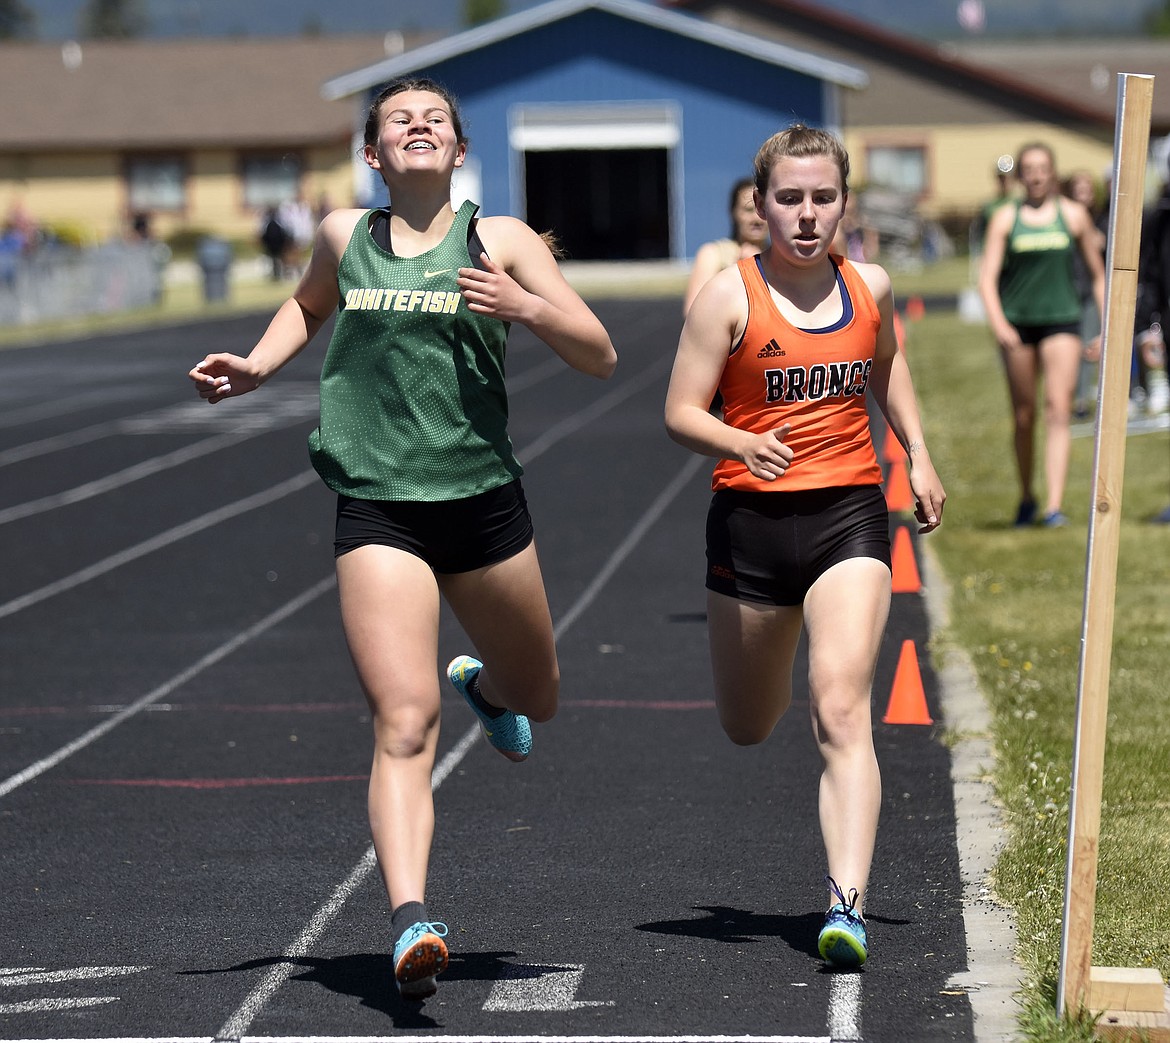 Whitefish's Raiya McCutcheon crosses the finish line in the 3200 meters at the Western A divisional track meet in Columbia Falls on Saturday. (Teresa Byrd/Hungry Horse News)